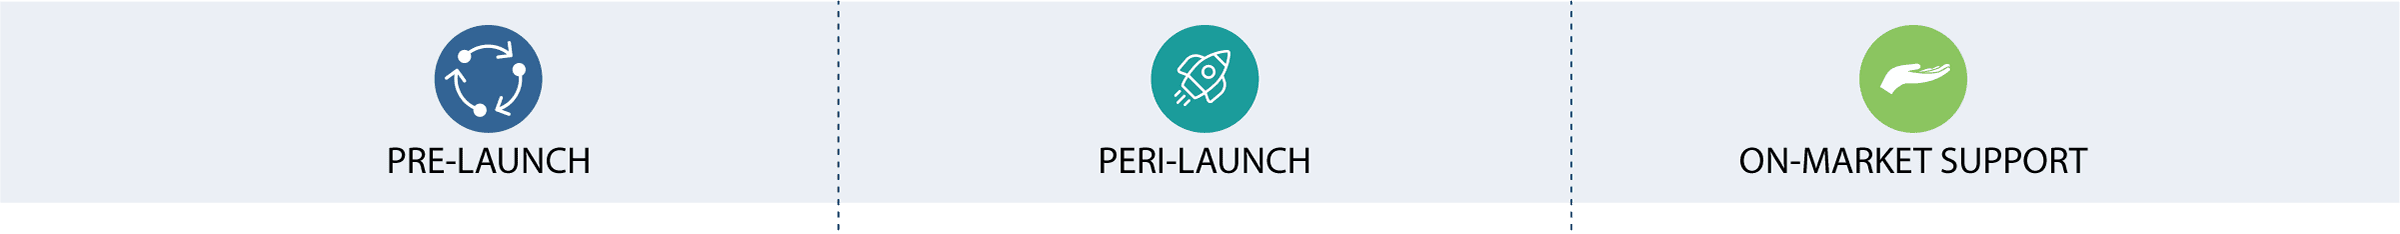 Phases: Pre-Launch, Peri-Launch, and On-Market Support